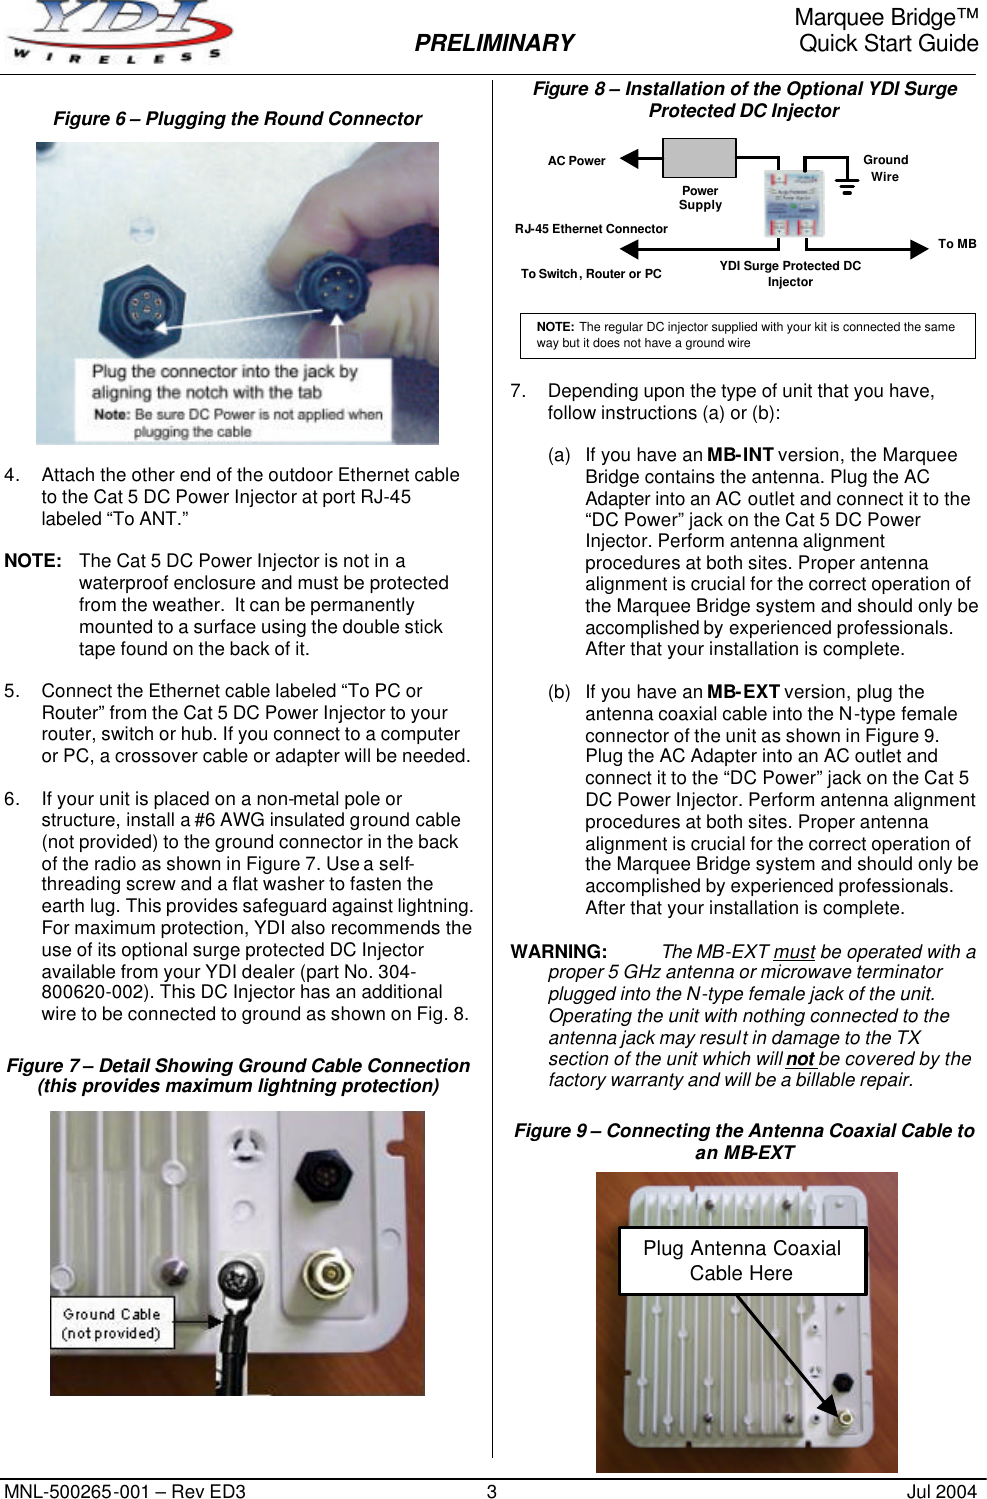     Marquee Bridge™  PRELIMINARY Quick Start Guide MNL-500265-001 – Rev ED3 3 Jul 2004 Figure 6 – Plugging the Round Connector   4. Attach the other end of the outdoor Ethernet cable to the Cat 5 DC Power Injector at port RJ-45 labeled “To ANT.”  NOTE: The Cat 5 DC Power Injector is not in a waterproof enclosure and must be protected from the weather.  It can be permanently mounted to a surface using the double stick tape found on the back of it.  5. Connect the Ethernet cable labeled “To PC or Router” from the Cat 5 DC Power Injector to your router, switch or hub. If you connect to a computer or PC, a crossover cable or adapter will be needed.  6. If your unit is placed on a non-metal pole or structure, install a #6 AWG insulated ground cable (not provided) to the ground connector in the back of the radio as shown in Figure 7. Use a self-threading screw and a flat washer to fasten the earth lug. This provides safeguard against lightning. For maximum protection, YDI also recommends the use of its optional surge protected DC Injector available from your YDI dealer (part No. 304-800620-002). This DC Injector has an additional wire to be connected to ground as shown on Fig. 8. Figure 7 – Detail Showing Ground Cable Connection (this provides maximum lightning protection)   Figure 8 – Installation of the Optional YDI Surge Protected DC Injector  7. Depending upon the type of unit that you have, follow instructions (a) or (b):  (a) If you have an MB-INT version, the Marquee Bridge contains the antenna. Plug the AC Adapter into an AC outlet and connect it to the “DC Power” jack on the Cat 5 DC Power Injector. Perform antenna alignment procedures at both sites. Proper antenna alignment is crucial for the correct operation of the Marquee Bridge system and should only be accomplished by experienced professionals. After that your installation is complete.  (b) If you have an MB-EXT version, plug the antenna coaxial cable into the N-type female connector of the unit as shown in Figure 9. Plug the AC Adapter into an AC outlet and connect it to the “DC Power” jack on the Cat 5 DC Power Injector. Perform antenna alignment procedures at both sites. Proper antenna alignment is crucial for the correct operation of the Marquee Bridge system and should only be accomplished by experienced professionals. After that your installation is complete.  WARNING: The MB-EXT must be operated with a proper 5 GHz antenna or microwave terminator plugged into the N-type female jack of the unit. Operating the unit with nothing connected to the antenna jack may result in damage to the TX section of the unit which will not be covered by the factory warranty and will be a billable repair. Figure 9 – Connecting the Antenna Coaxial Cable to an MB-EXT              Plug Antenna Coaxial Cable Here AC Power RJ-45 Ethernet Connector   To Switch, Router or PC To MB Power Supply YDI Surge Protected DC Injector Ground Wire NOTE: The regular DC injector supplied with your kit is connected the same way but it does not have a ground wire 